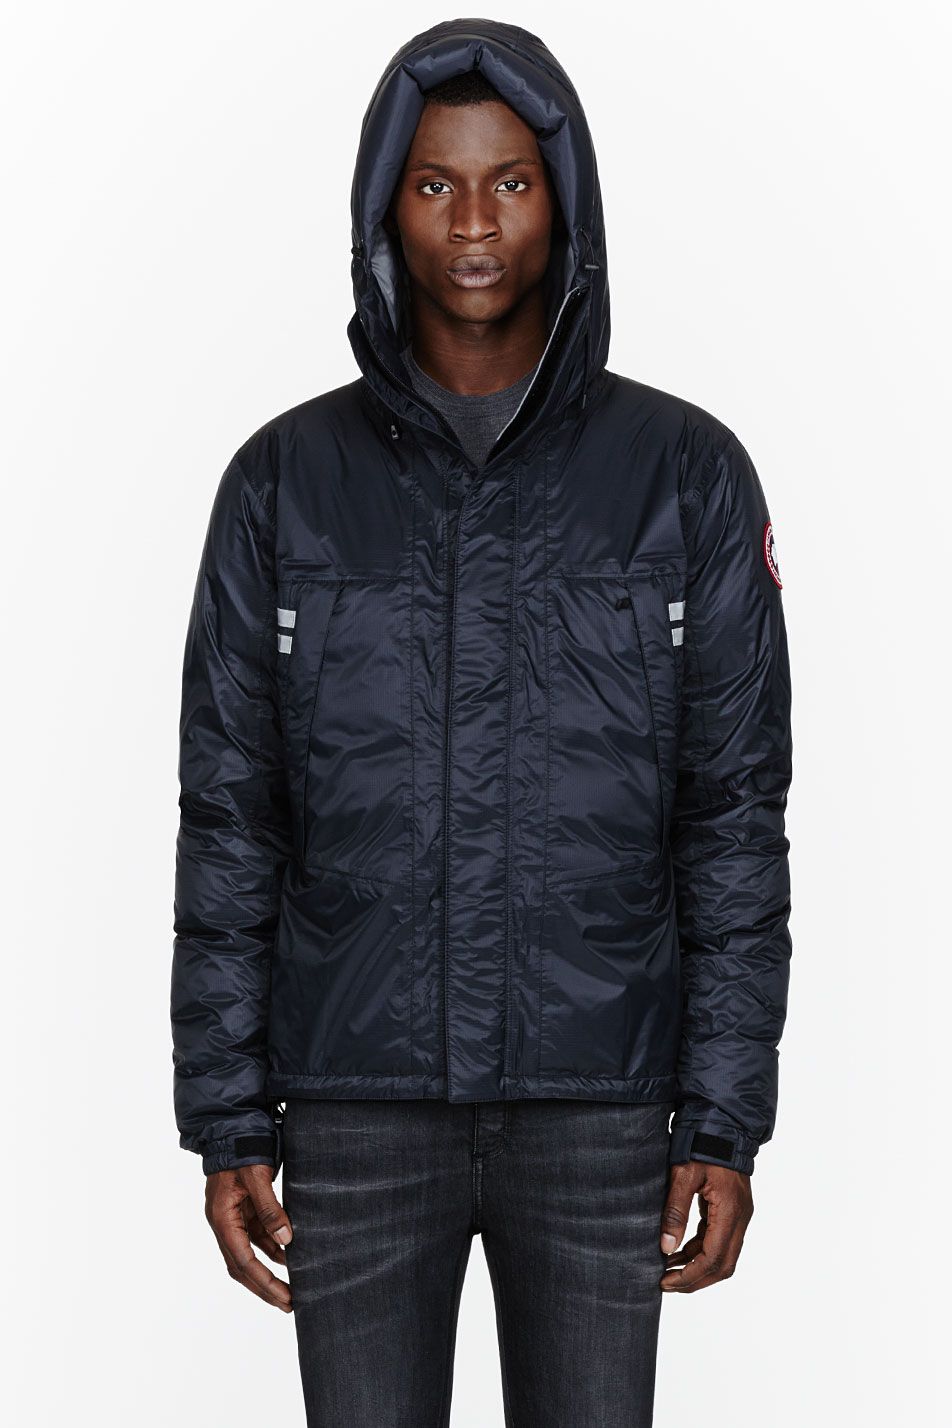 Special offer > canada goose mountaineer jacket, Up to 74% OFF